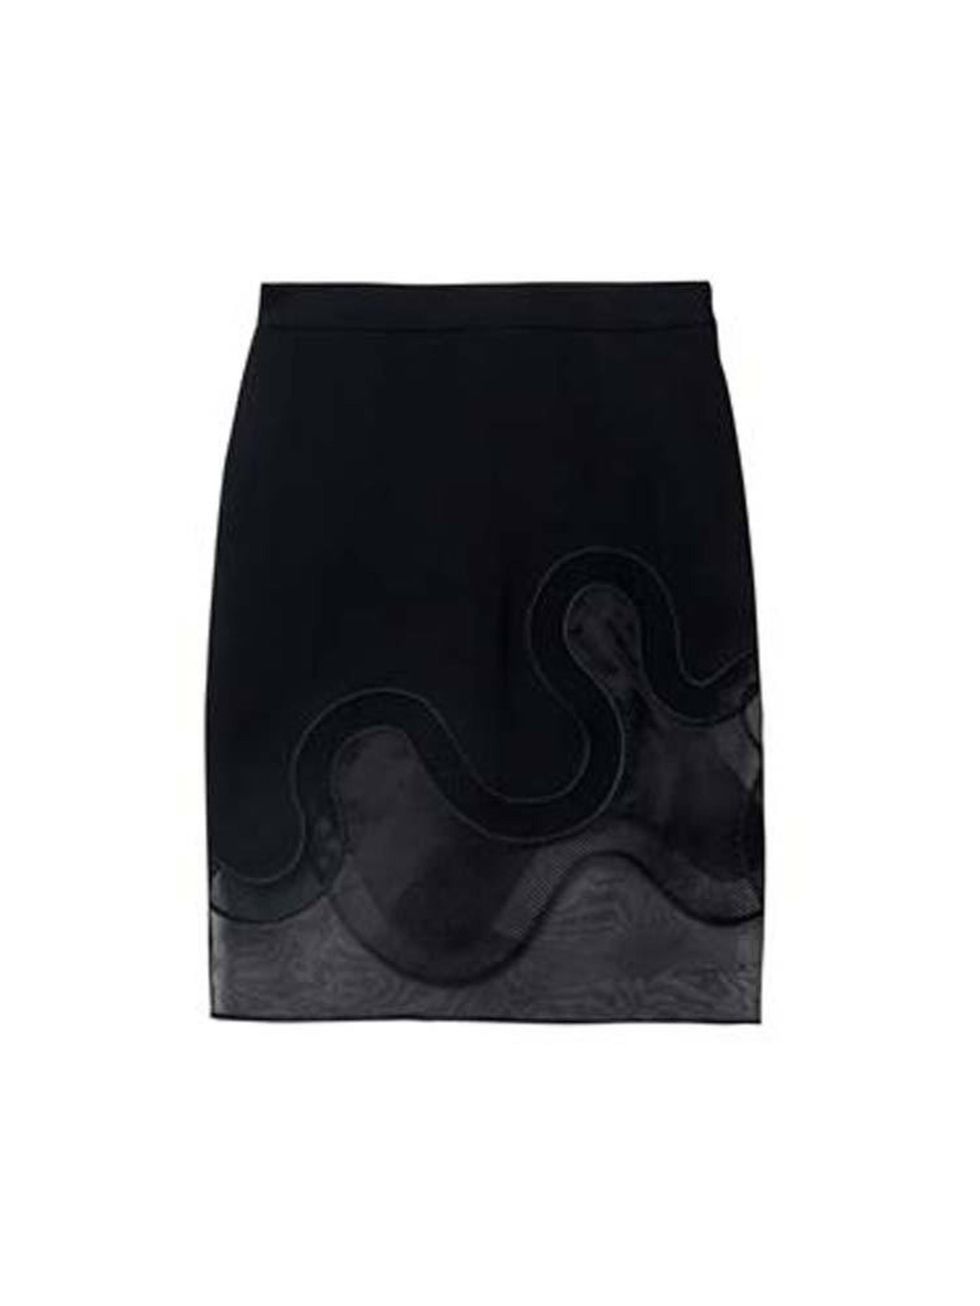 <p>Day 1 - Option one: <a href="http://www.matchesfashion.com/product/209287">Stella McCartney</a> skirt with see through detail</p>